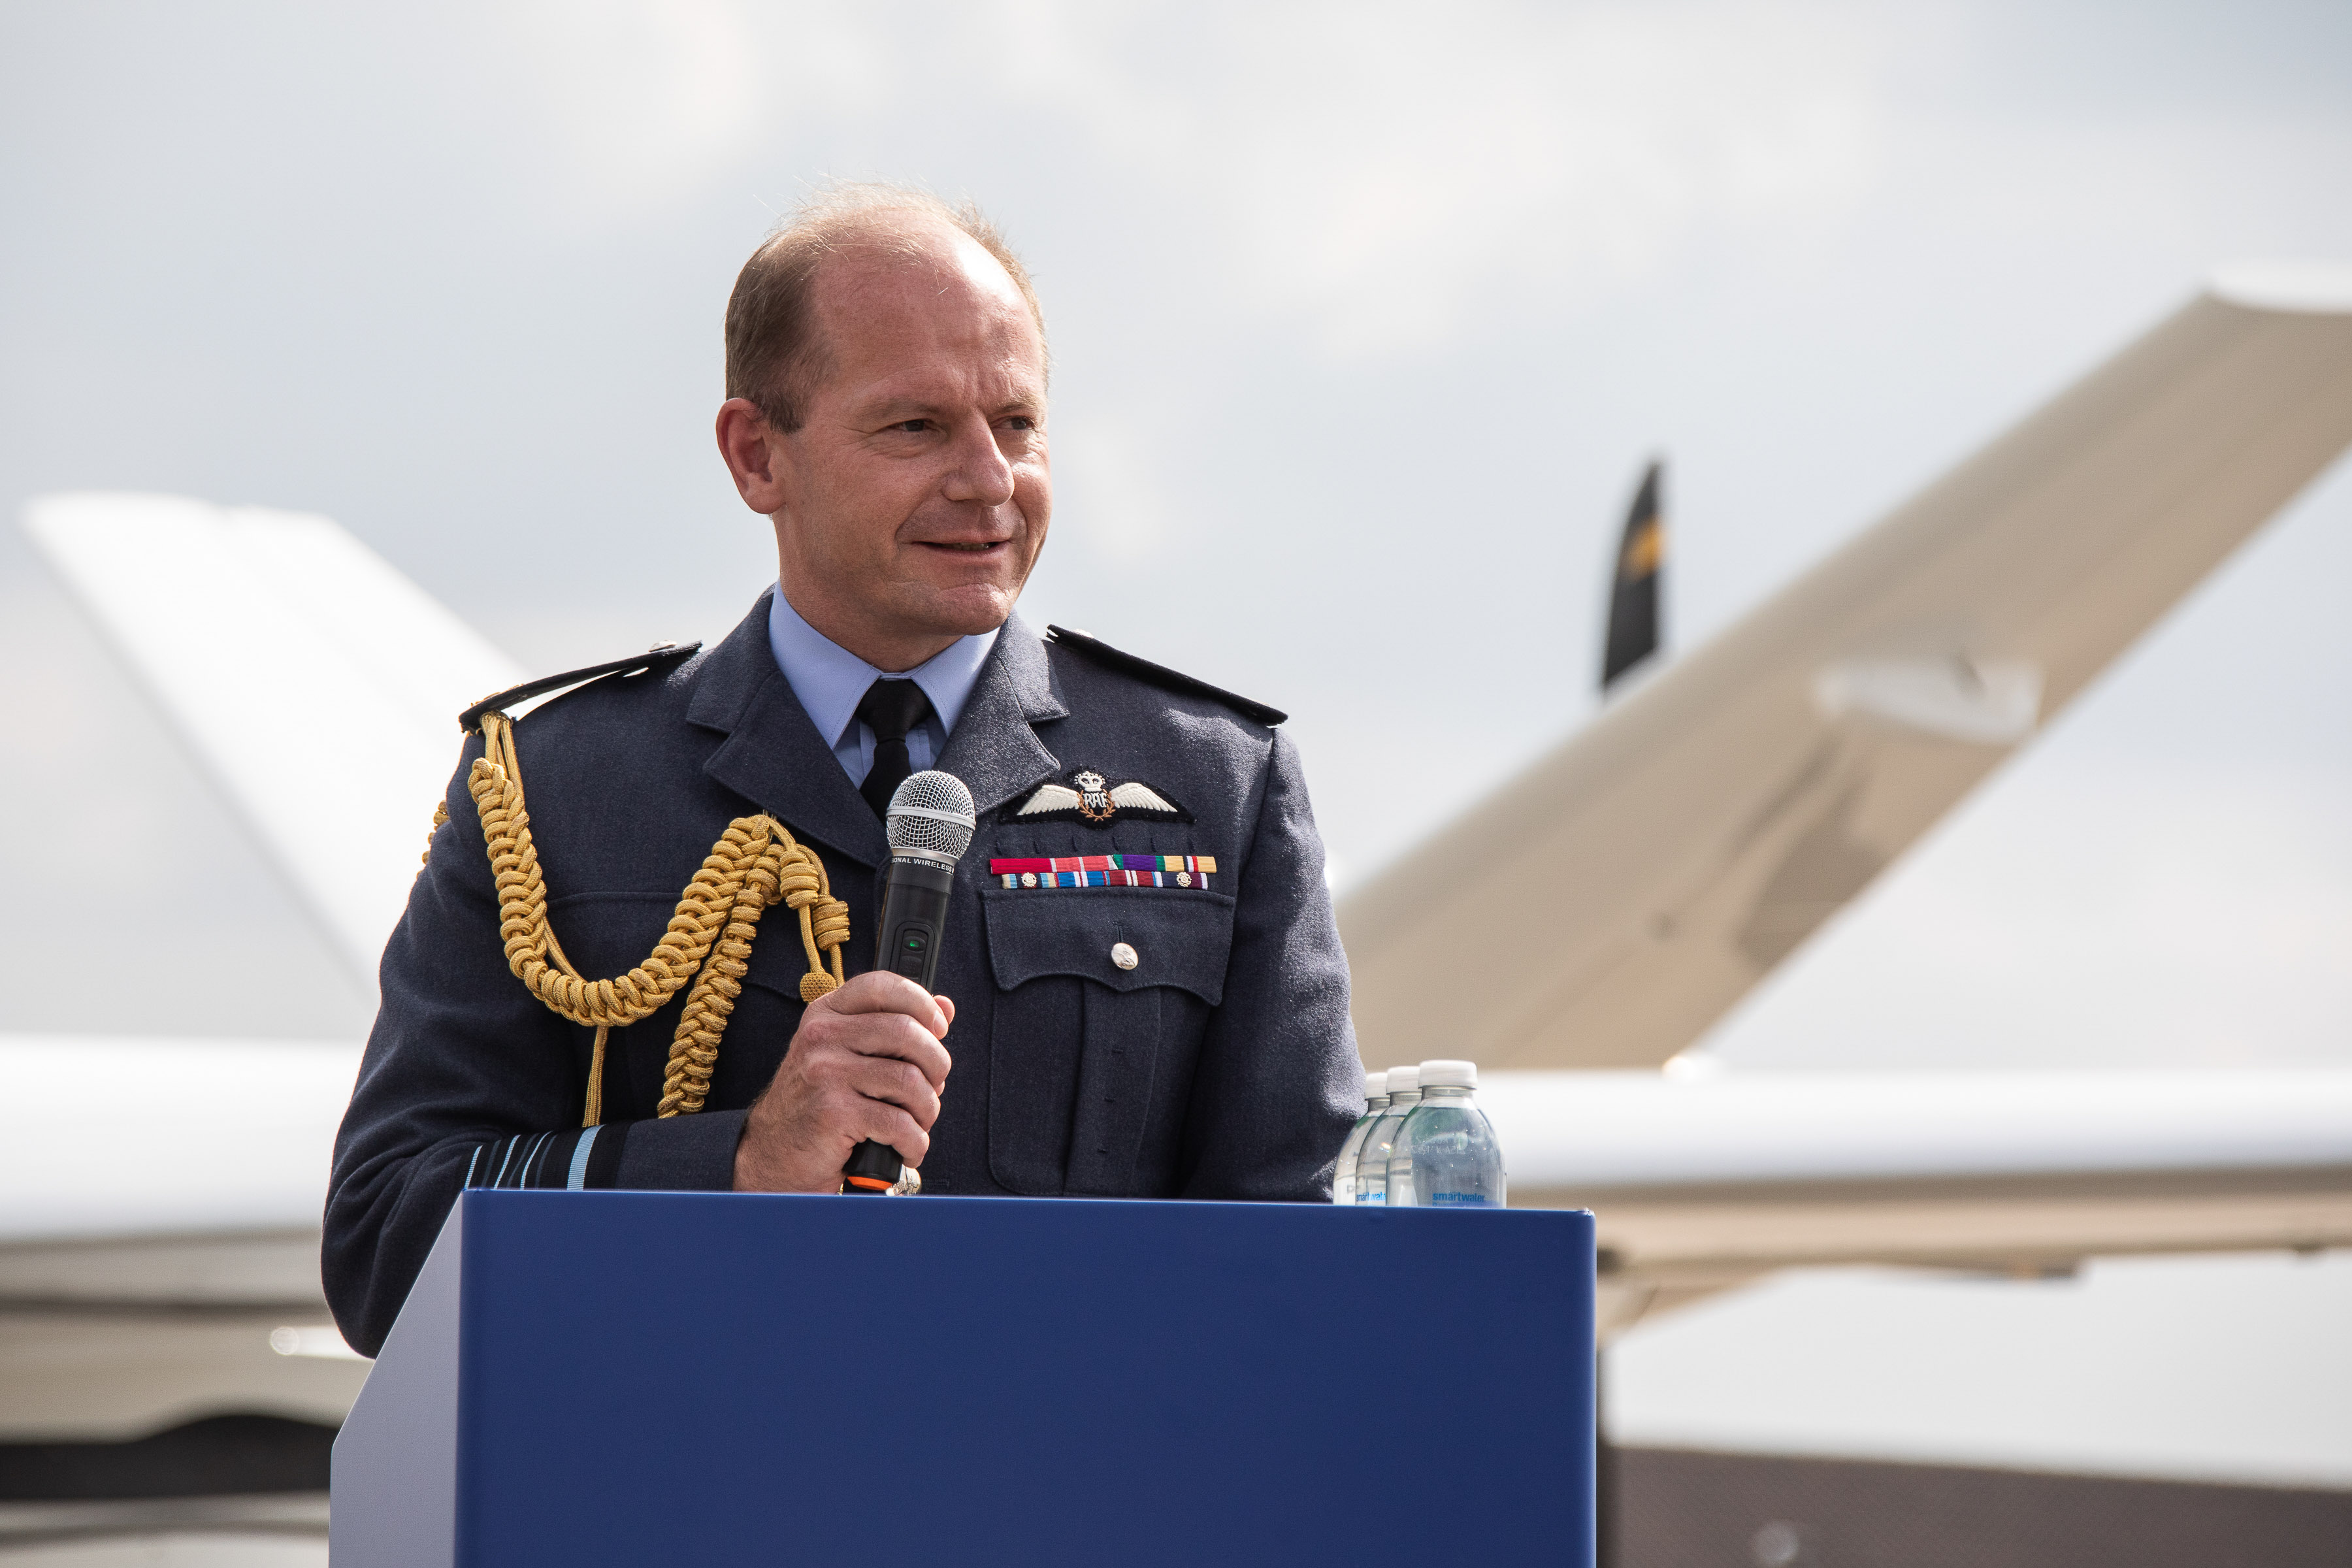 Image shows the Chief of the Air Staff, Air Chief Marshal Sir Mike Wigston speaking in front of the SkyGuardian aircraft.